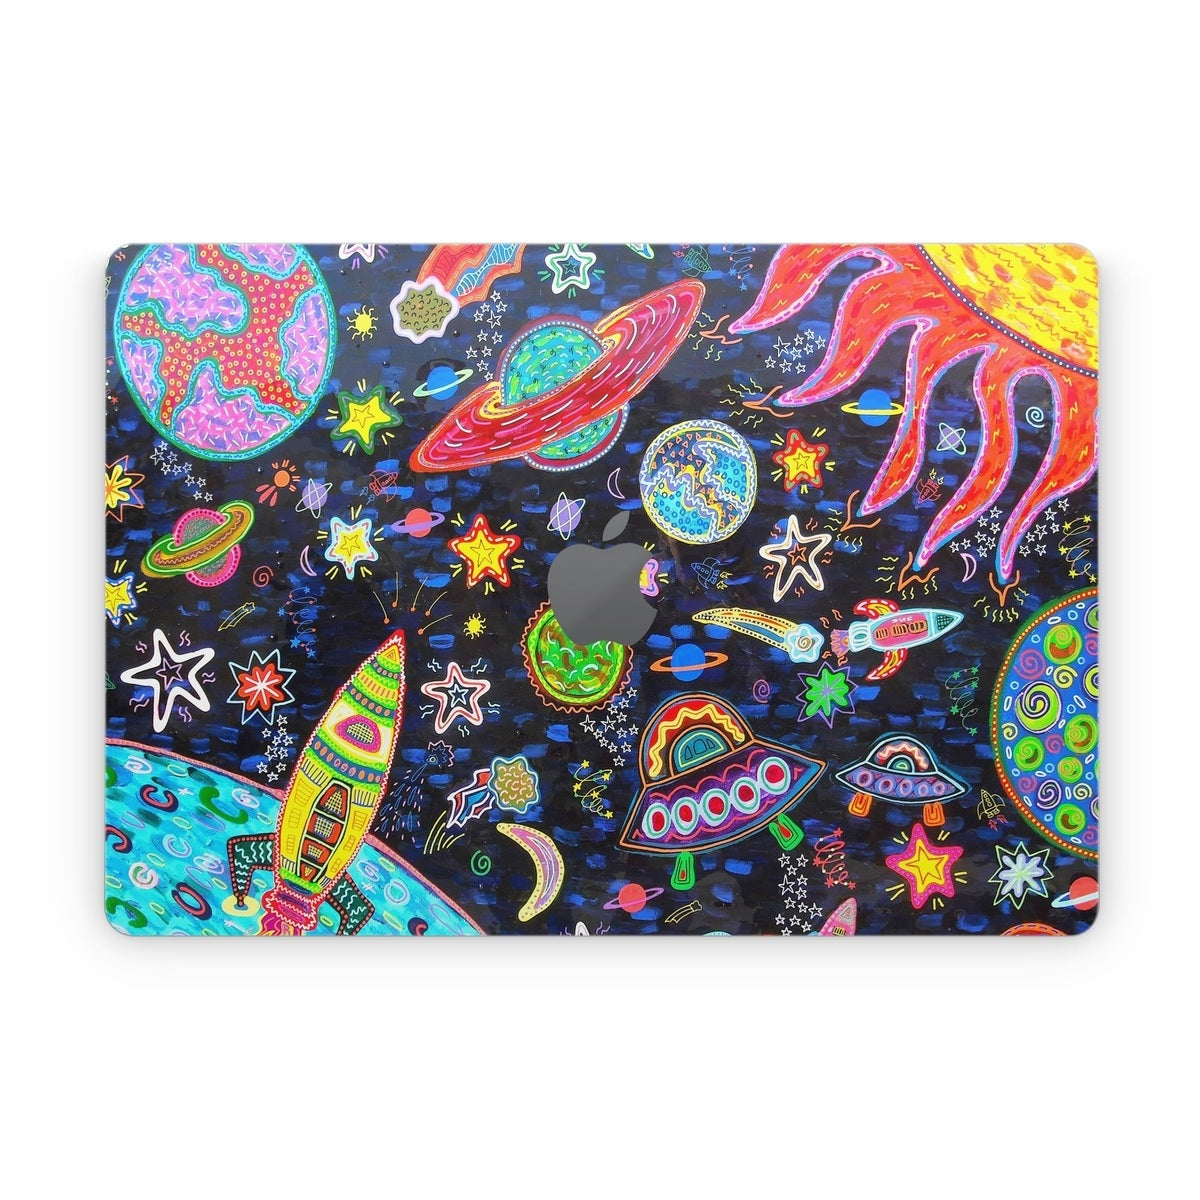 Out to Space - Apple MacBook Skin